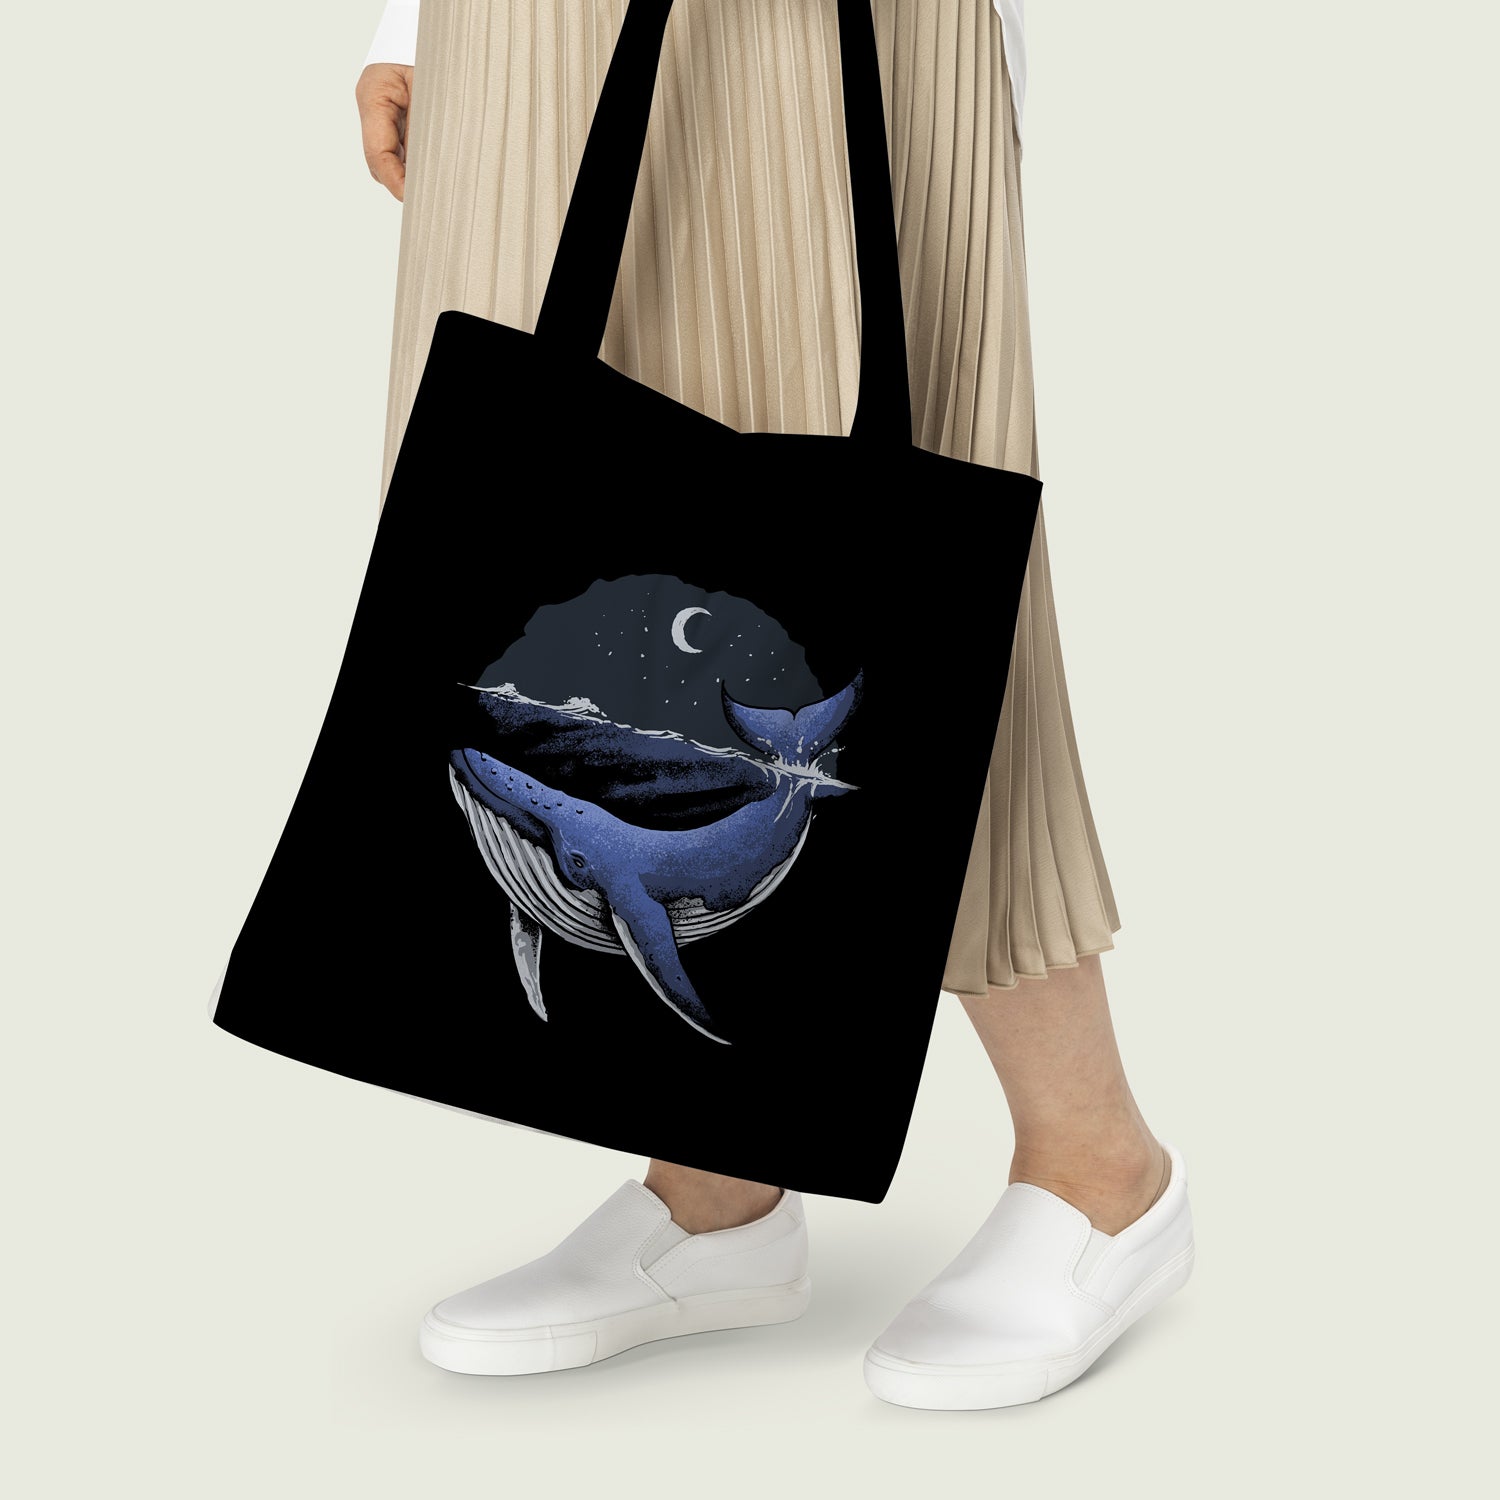 Fashionable tote bag showcasing a whale design alongside moon and stars, a unique accessory for any occasion